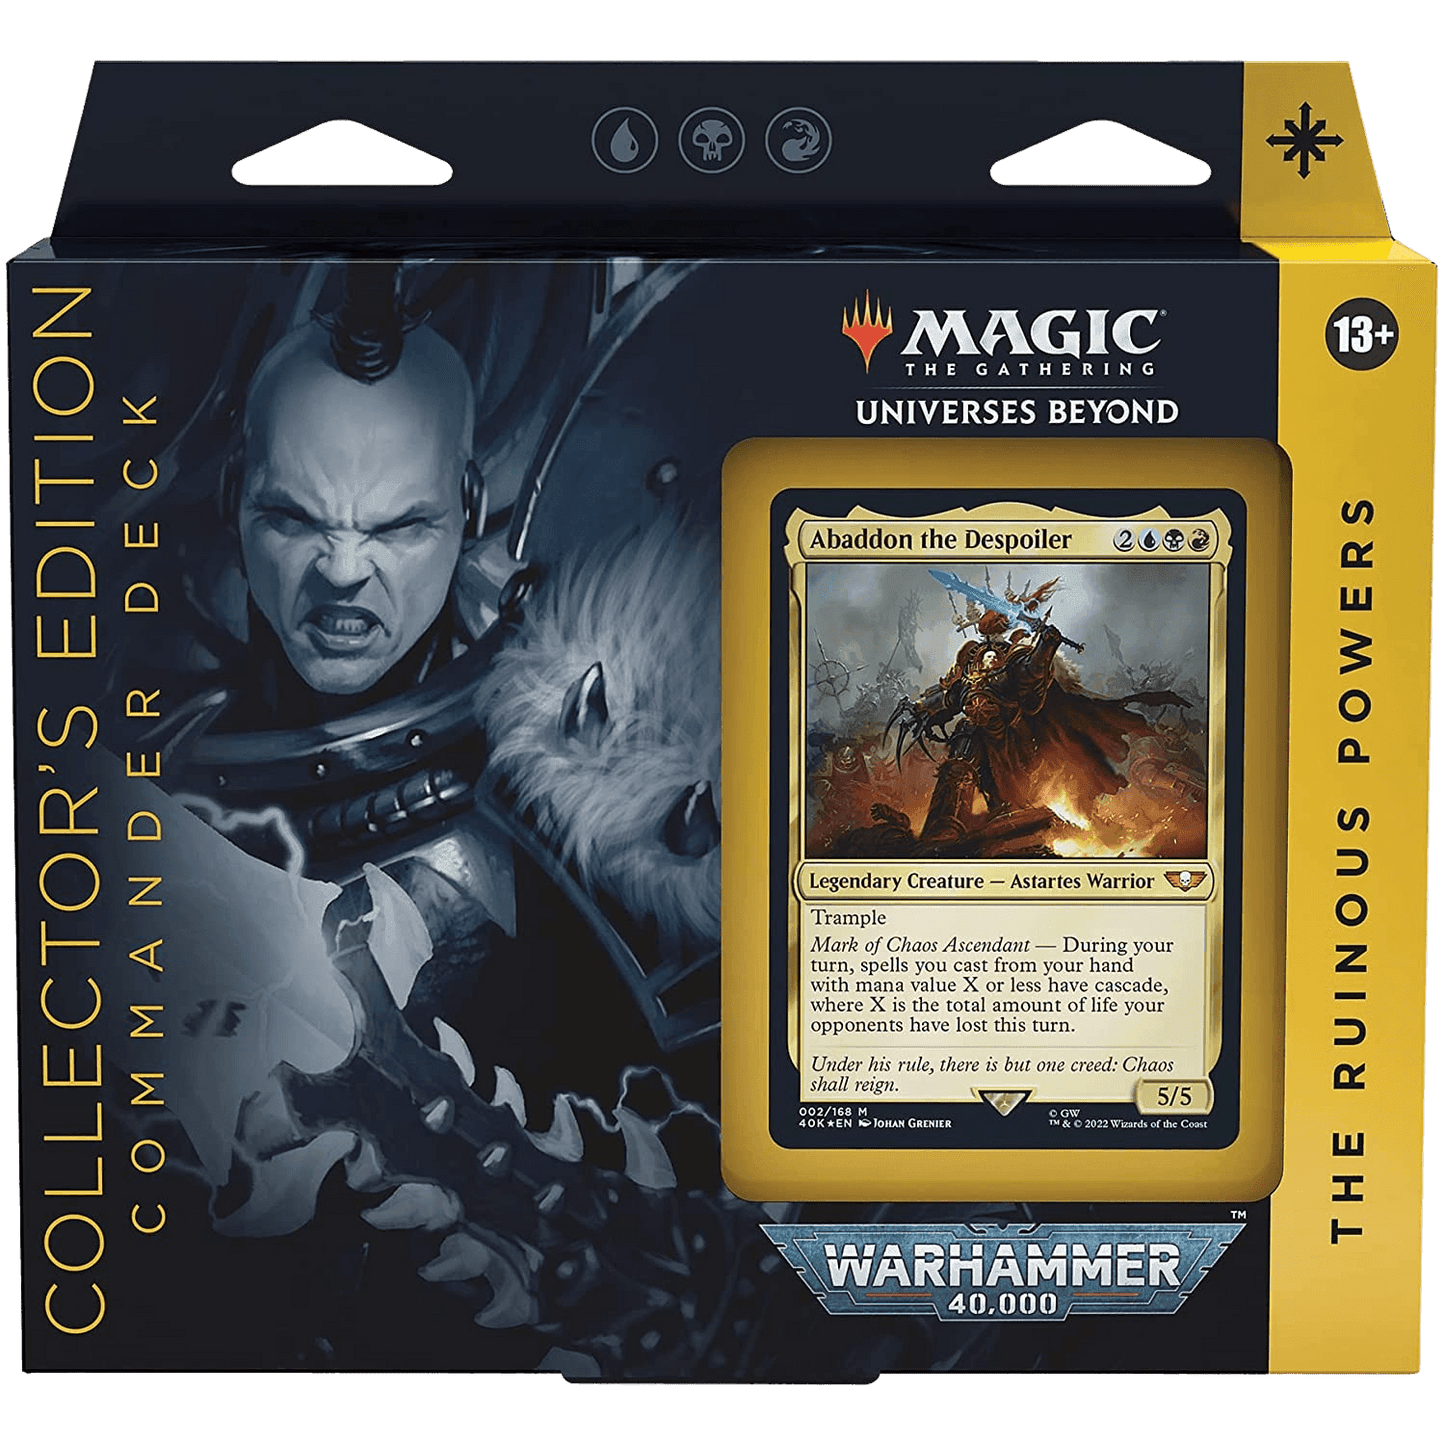 Magic: The Gathering - Universes Beyond: Warhammer 40,000 Commander Deck - Collectors Edition